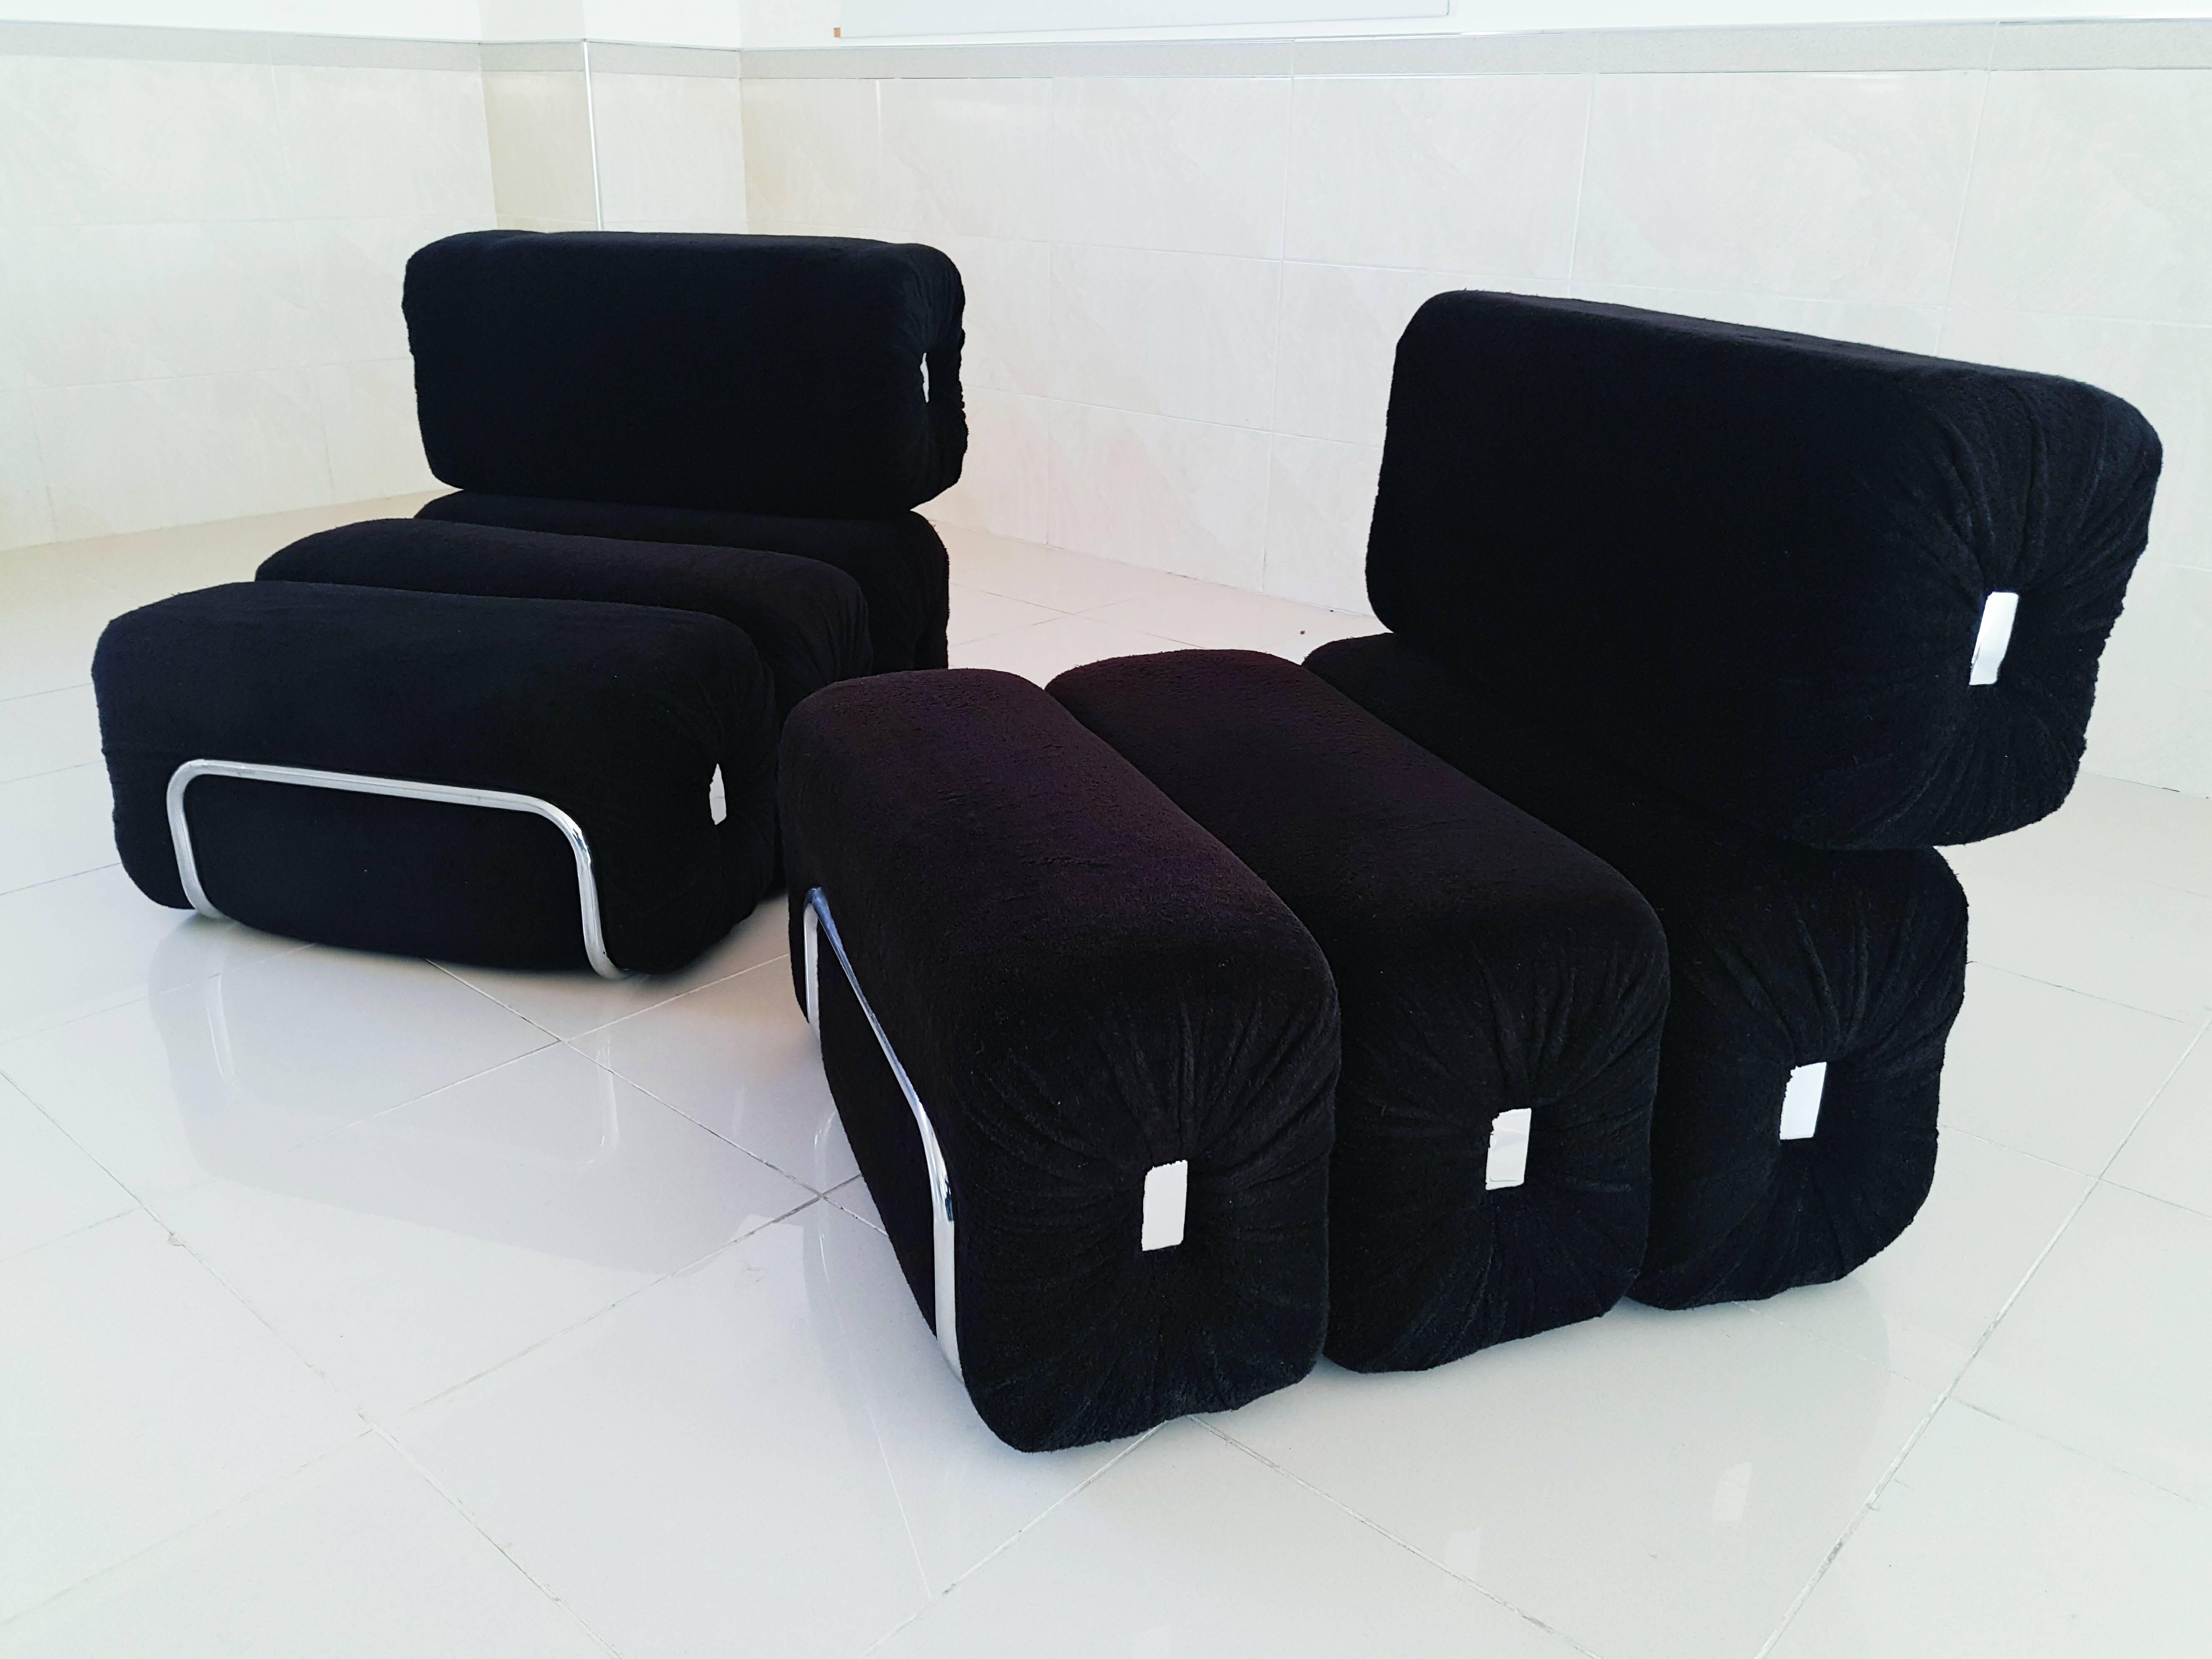 Rare and beautiful pair of French lounge armchairs manufactured in 1970s, in perfect vintage condition with black velvet original fabric and chrome tubular structure. Foam and fabric in perfect condition.